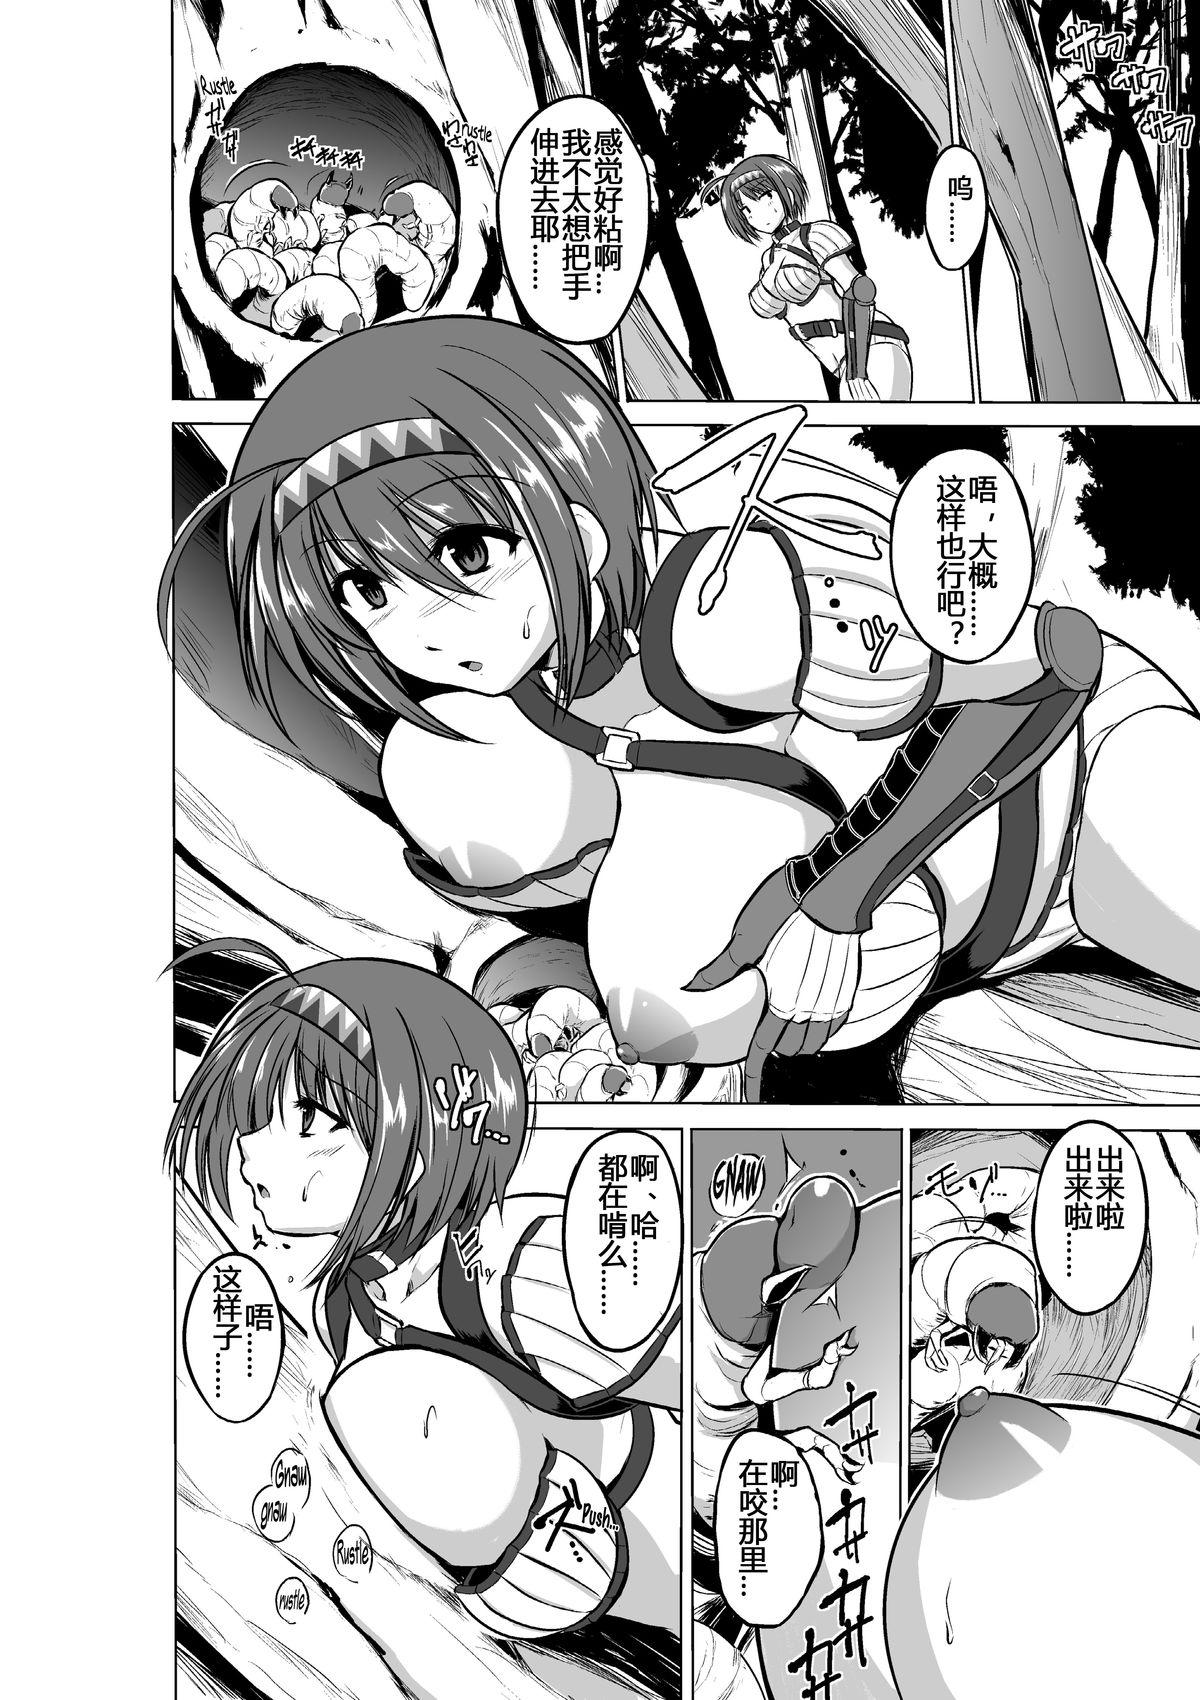 Gay Bus Dungeon Travelers - Chie no Himegoto - Toheart2 Suck Cock - Page 6